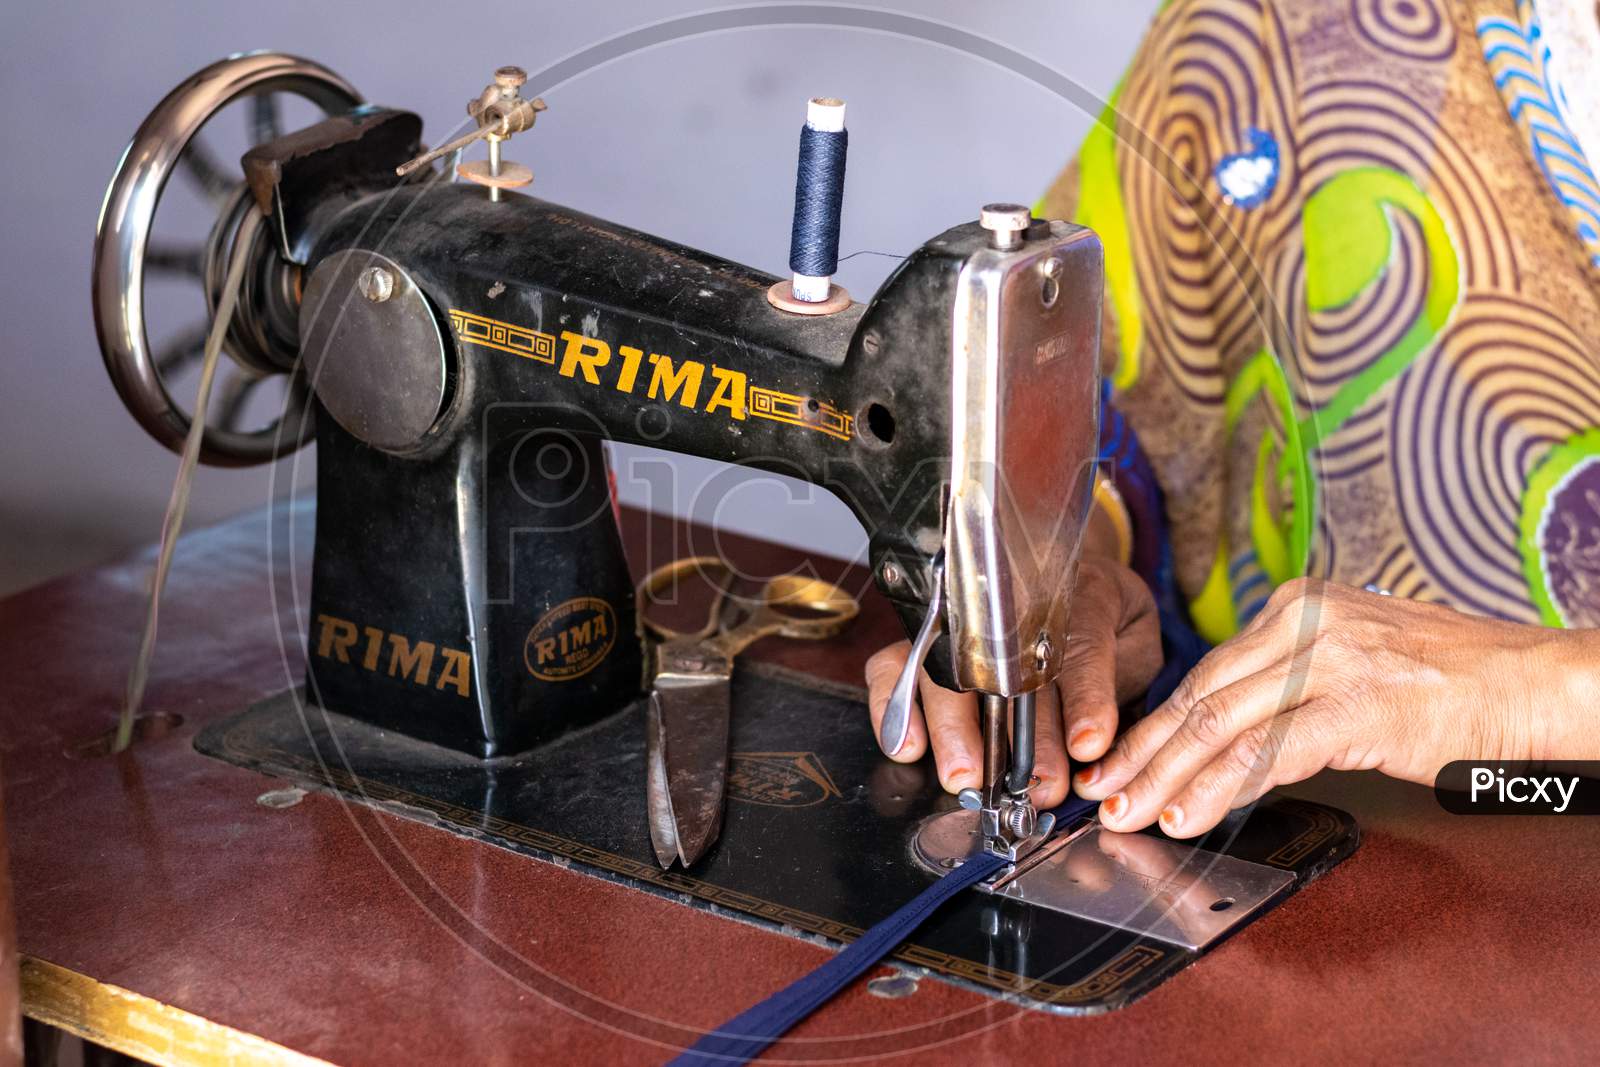 A woman working on sewing machine at home